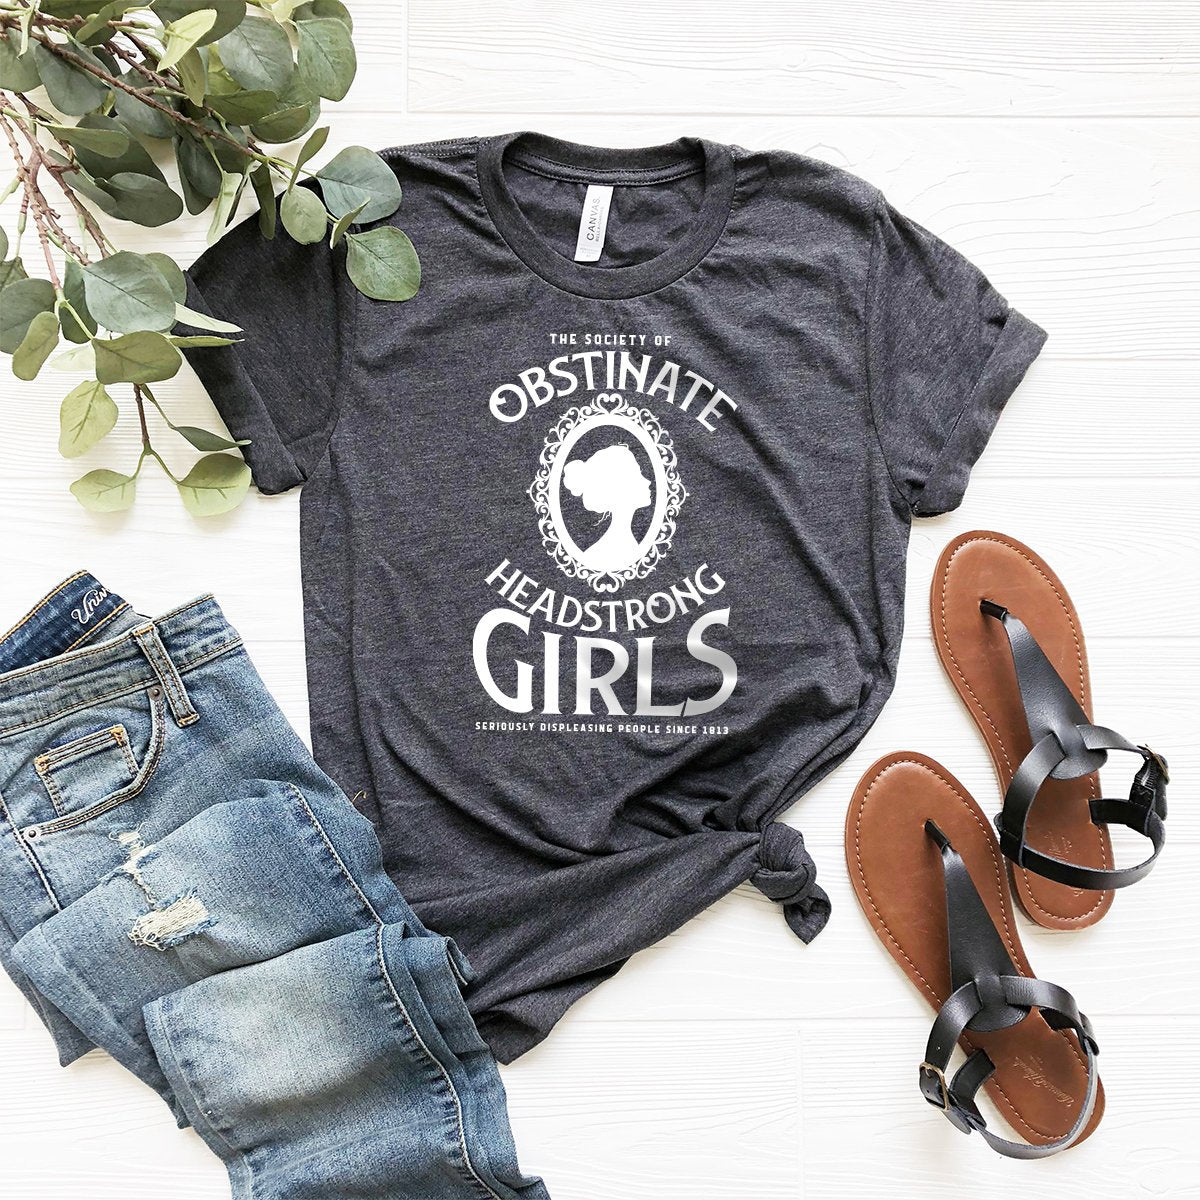 Society Of Obstinate Headstrong Girls, Feminist Shirt, Jane Austen Quotes T Shirt, Pride And Prejudice Shirt - Fastdeliverytees.com